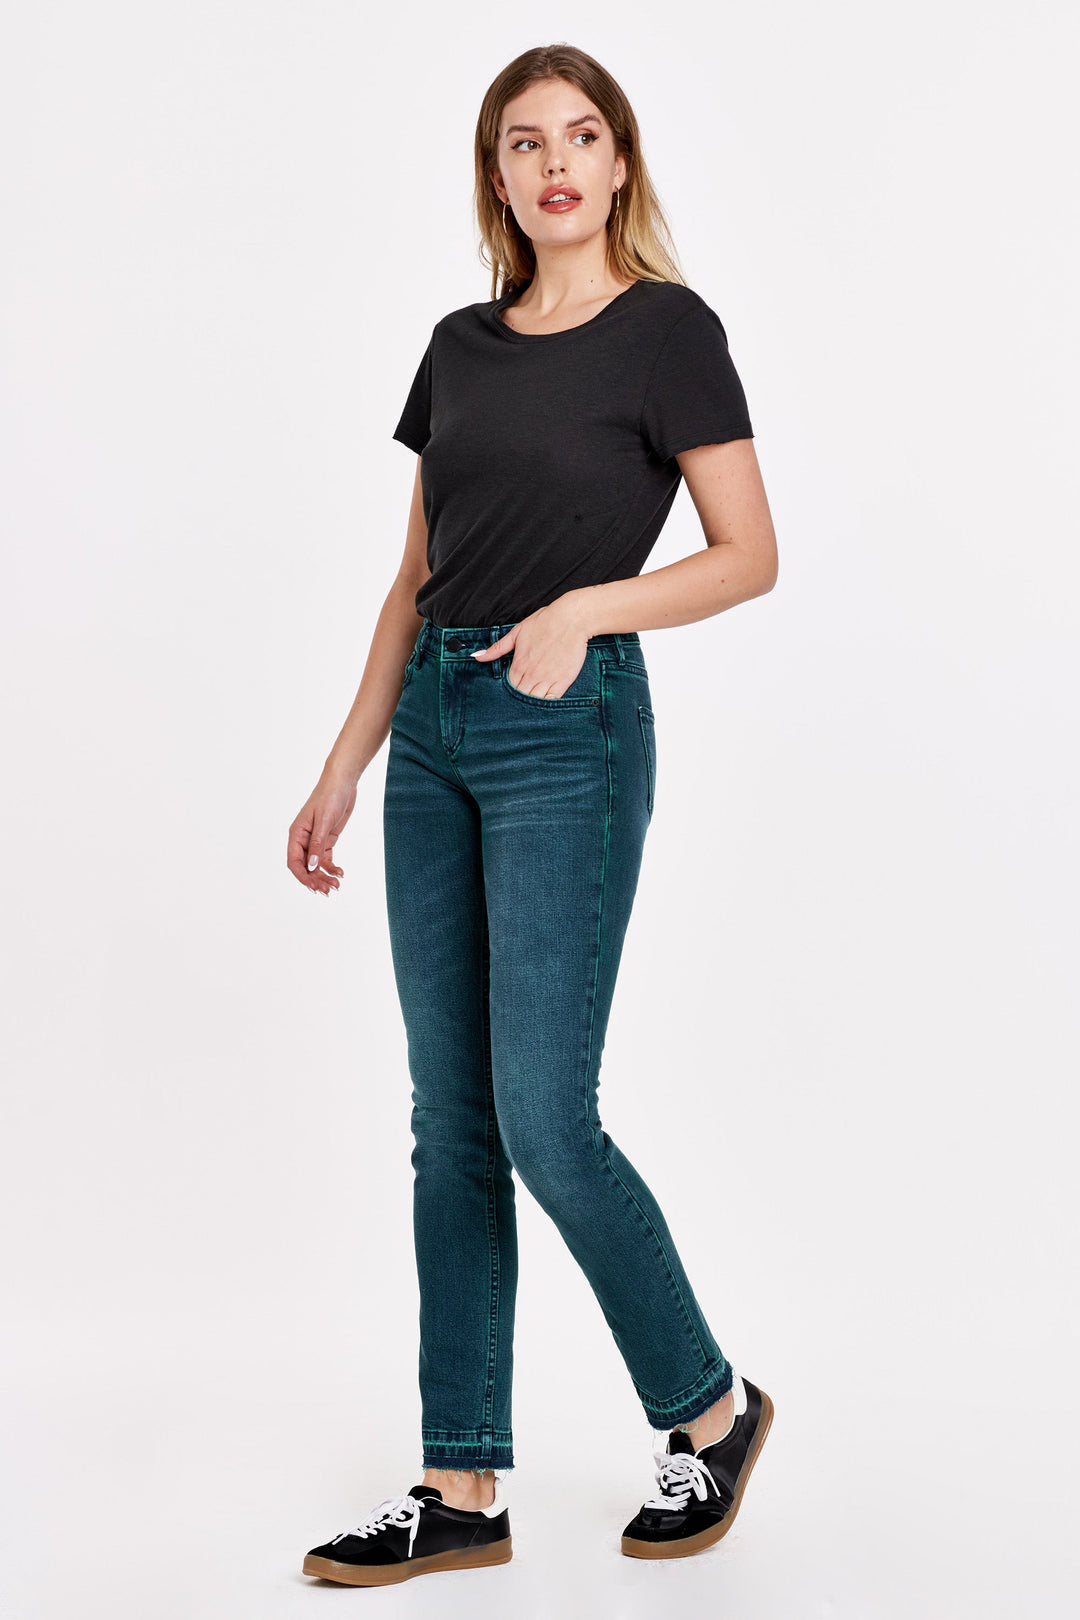 blaire-high-rise-slim-straight-jeans-pacific-teal